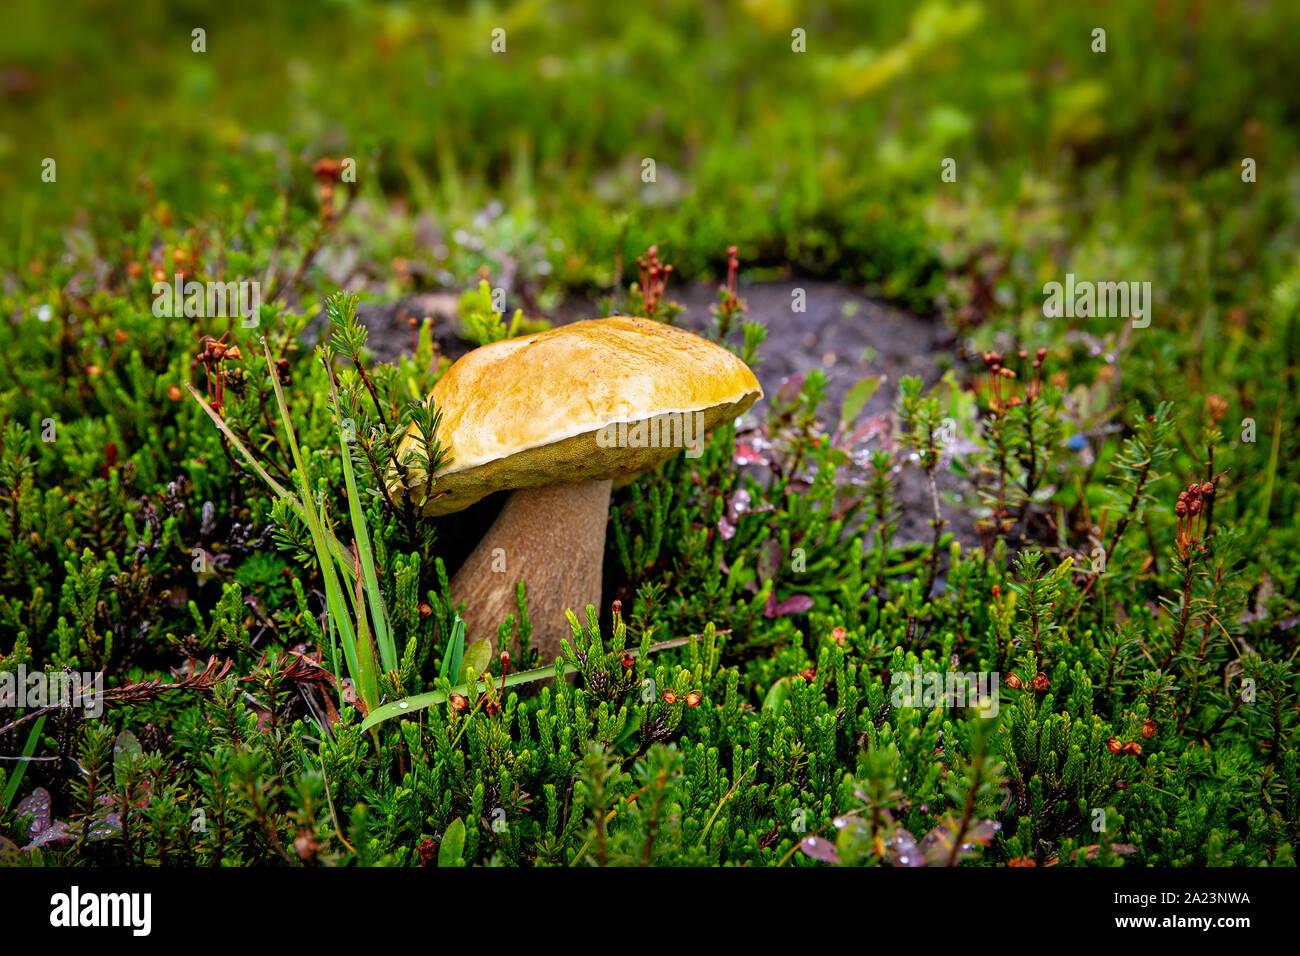 Wild edible bolete mushroom growing in green moss on the forest floor in British Columbia, Canada Stock Photo